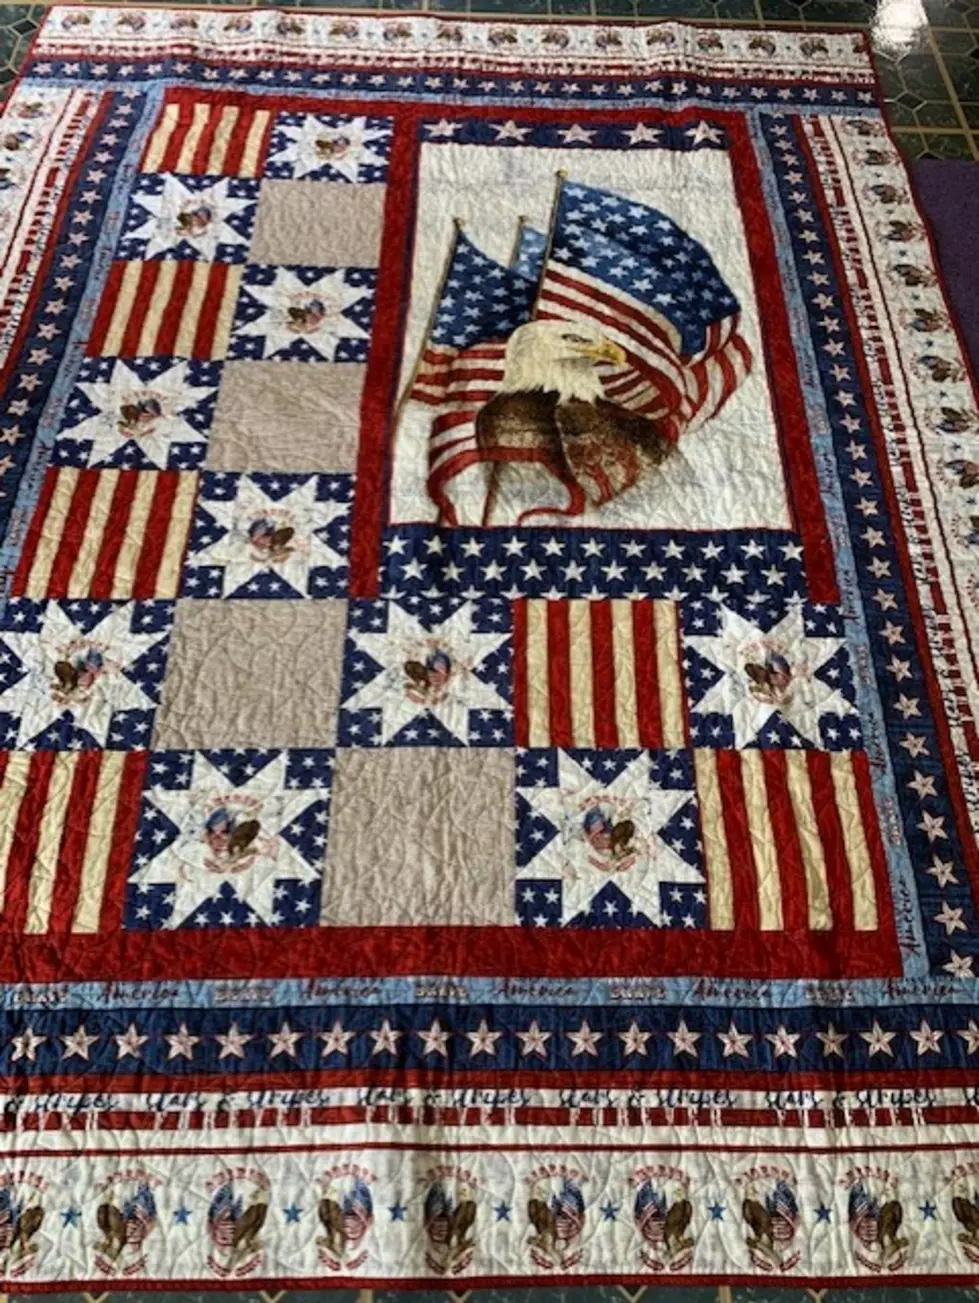 Local Quilts of Valor Group of Dubuque Honors Area Veterans on September 11th